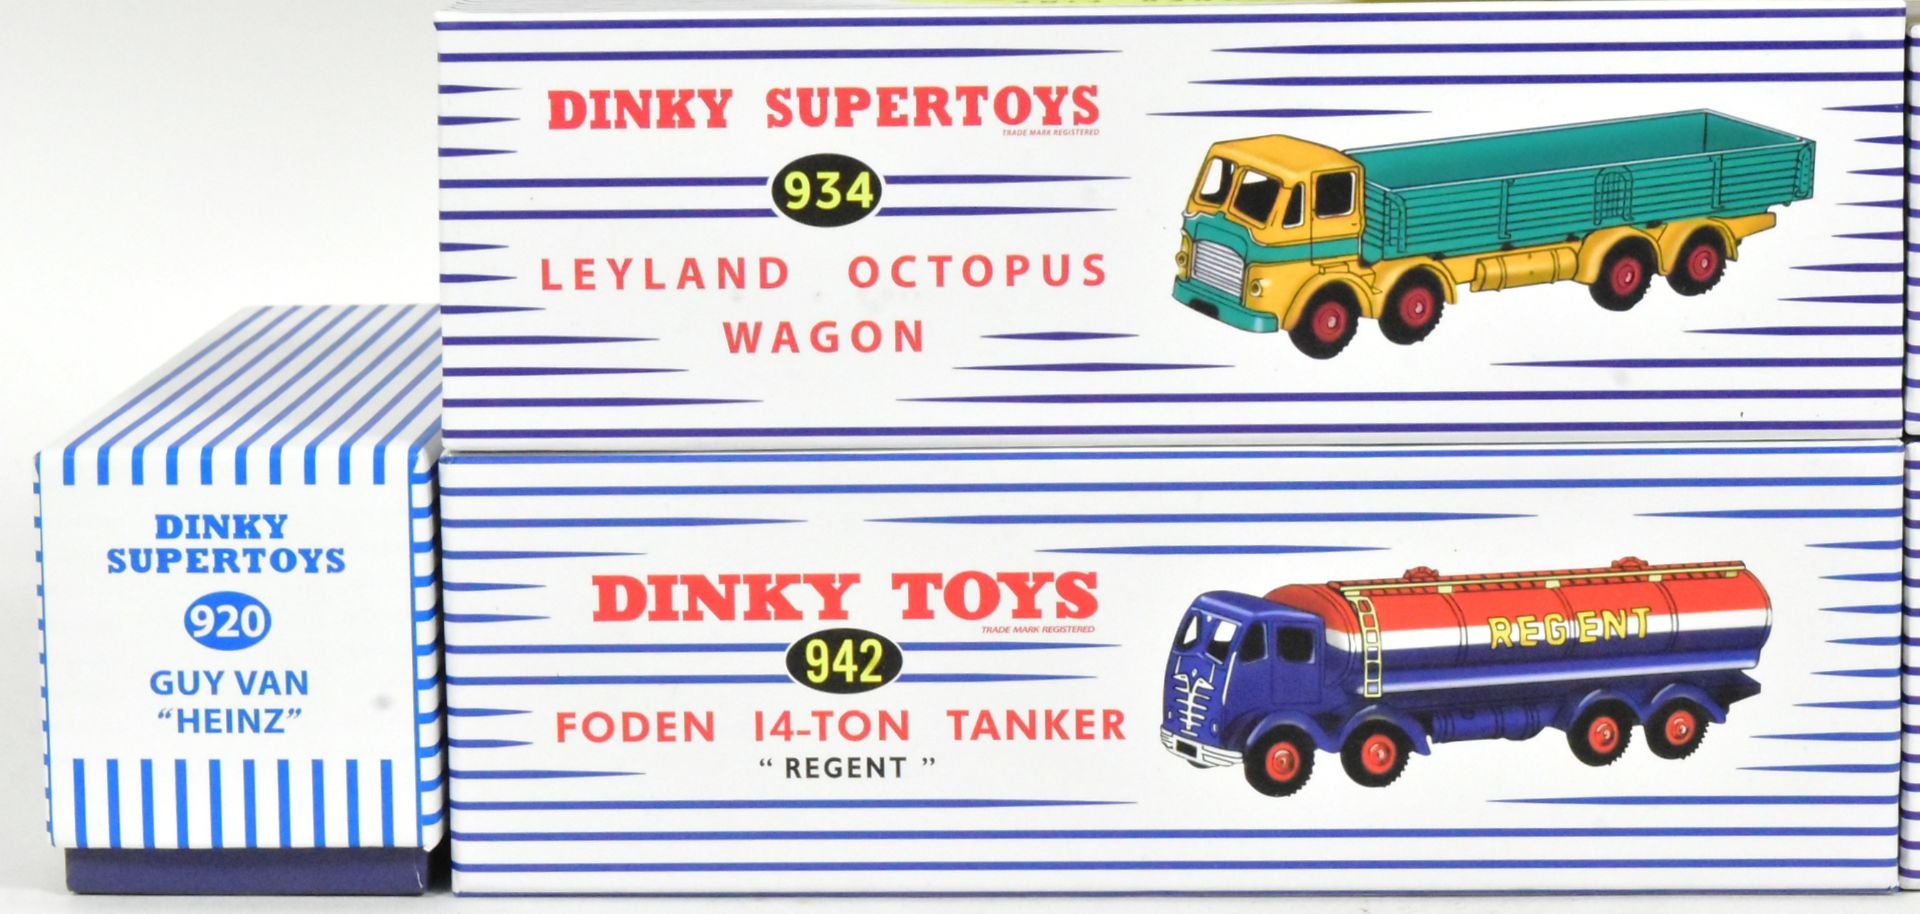 DIECAST - ATLAS EDITION DINKY TOYS - Image 2 of 4